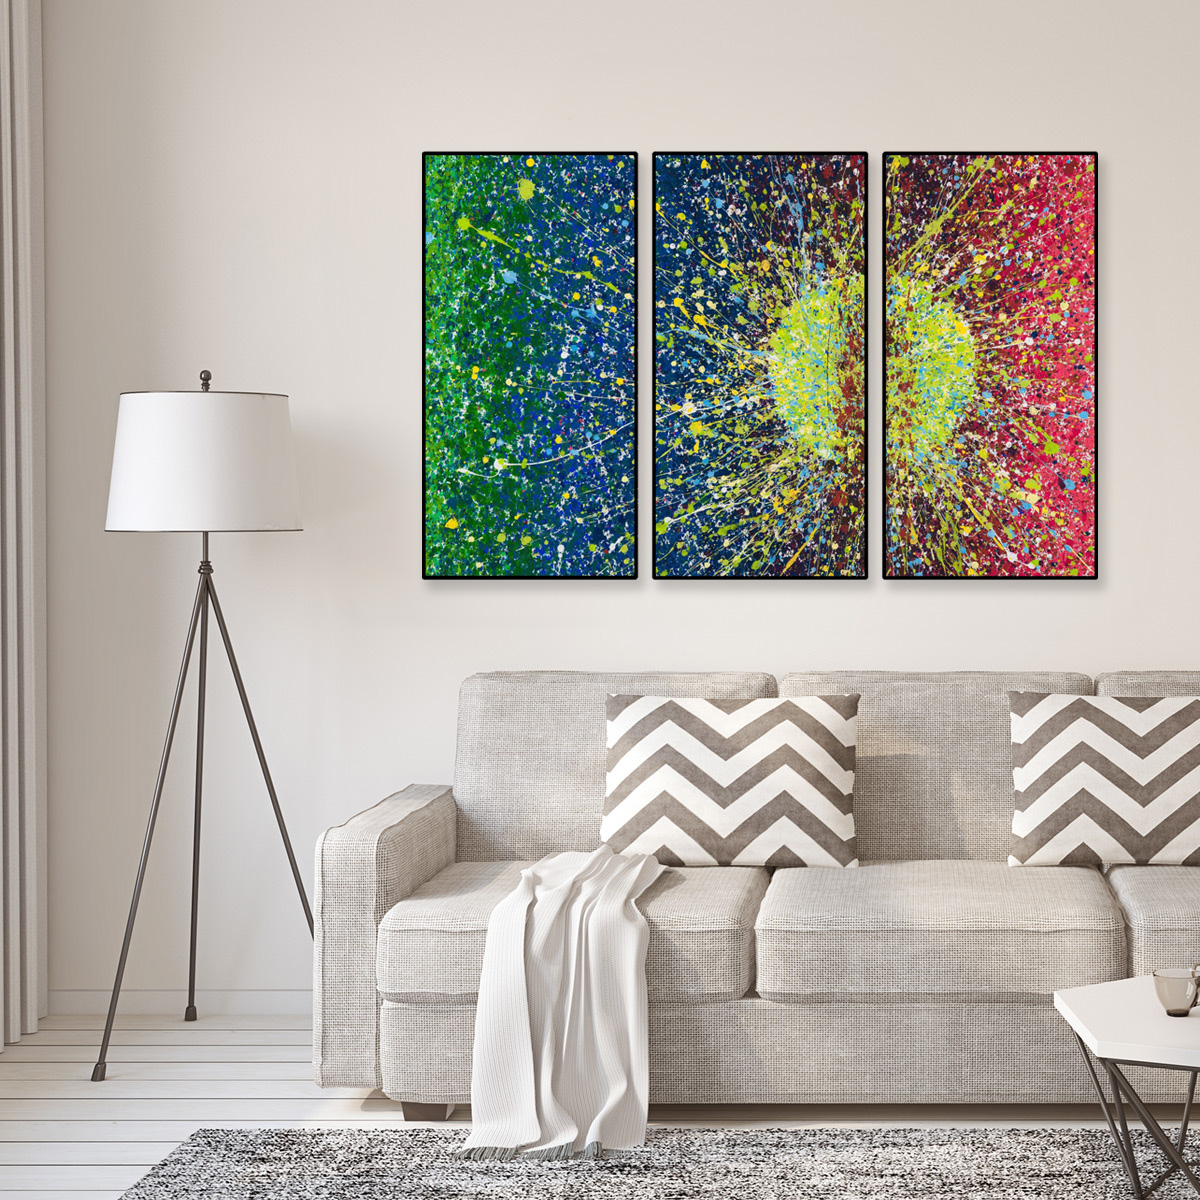 Abstract artwork on triptych frame in living room setting